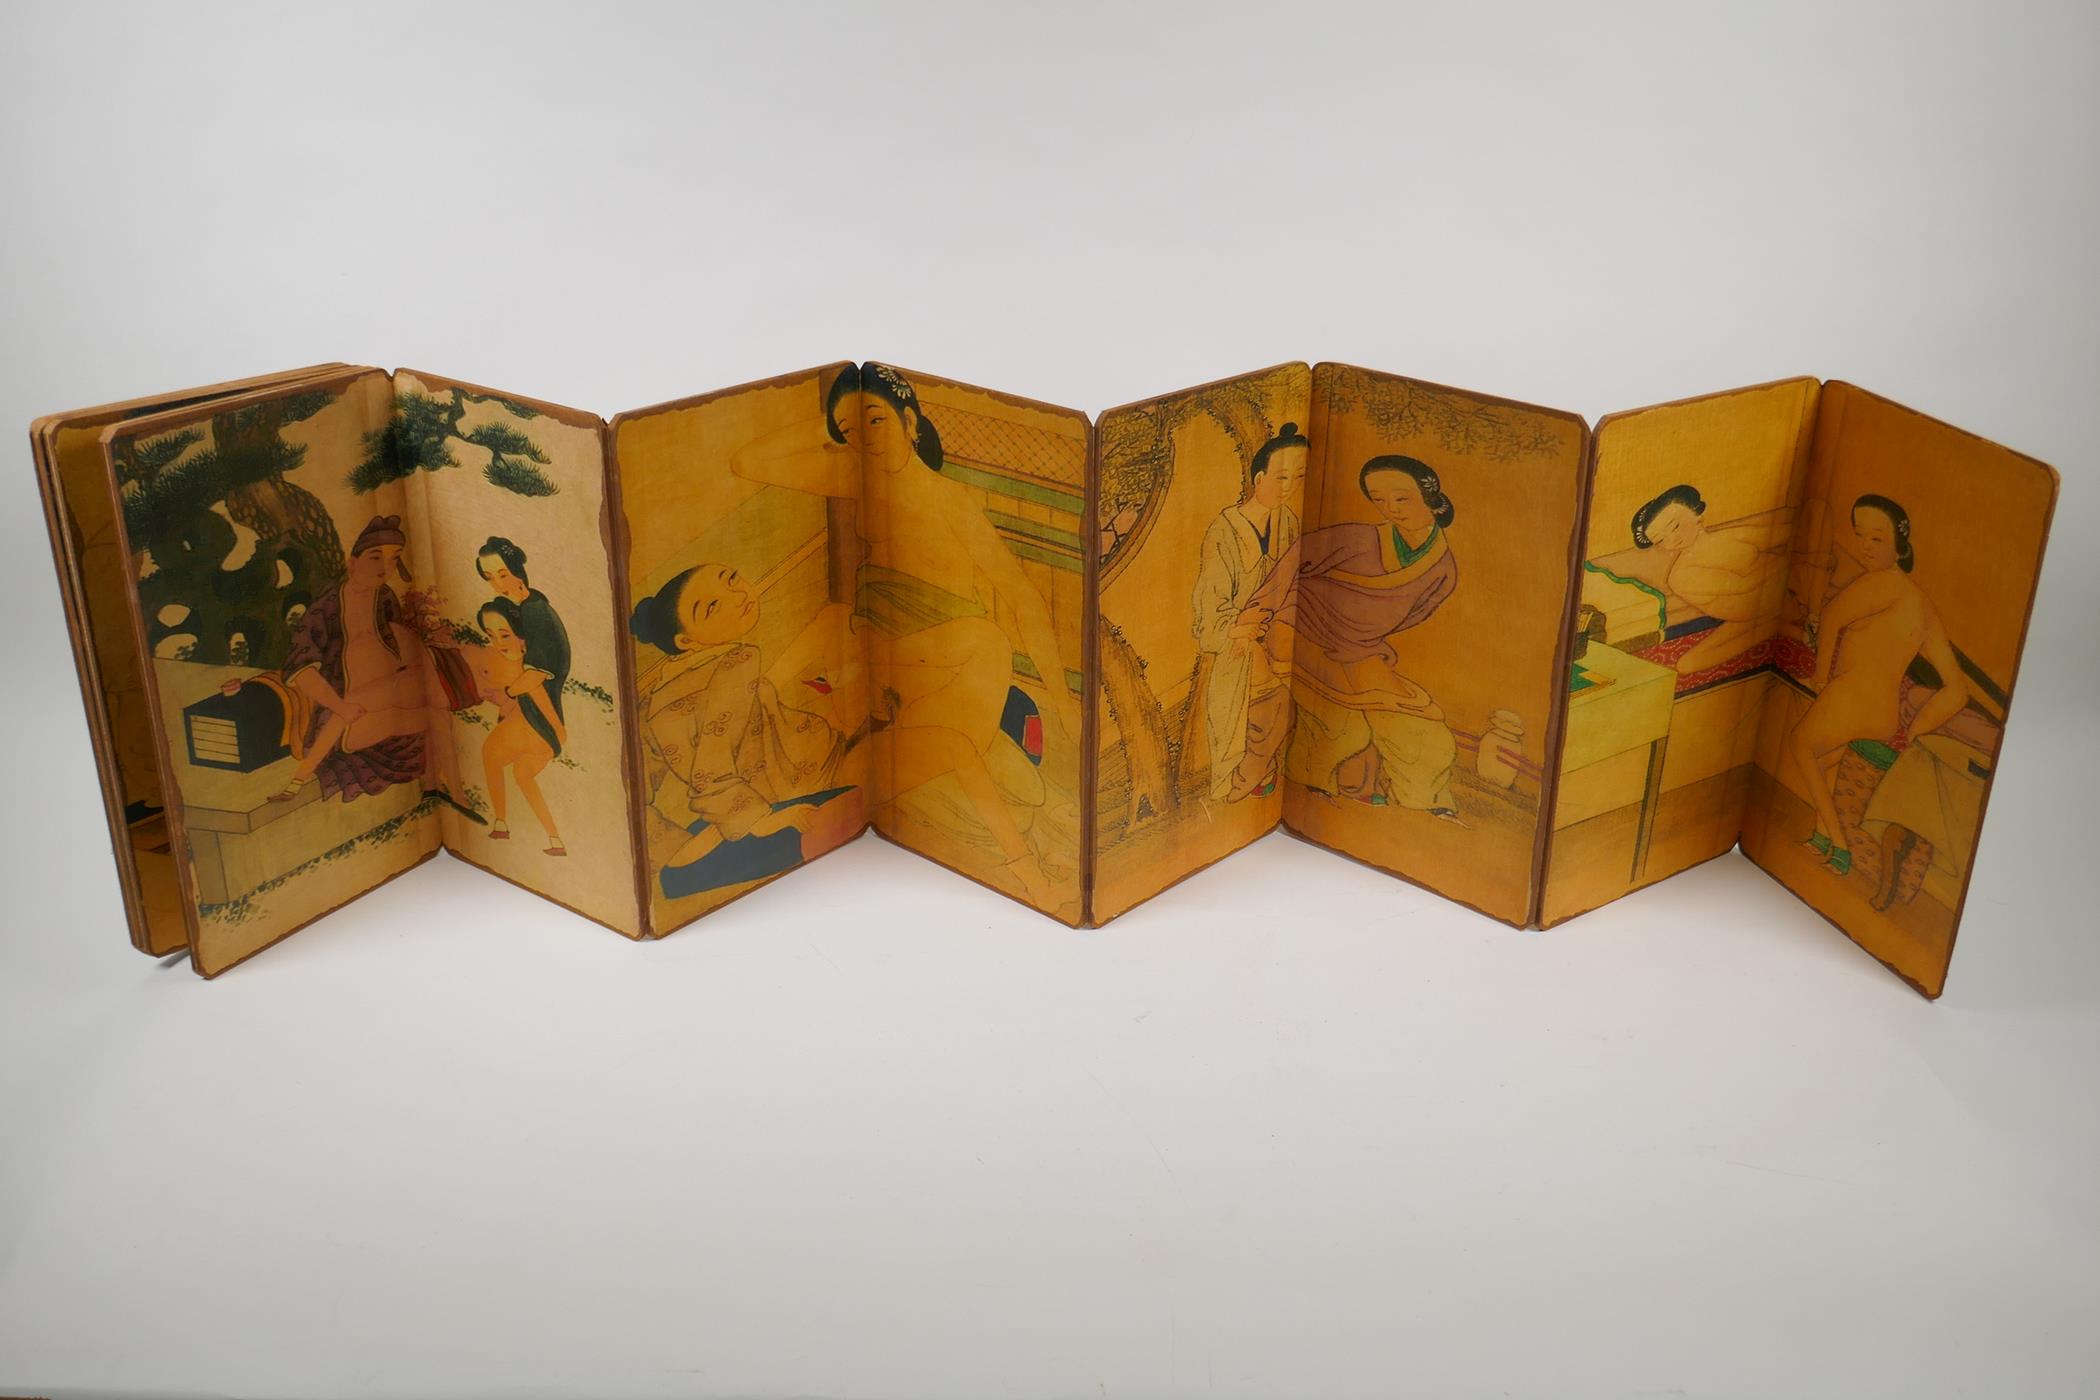 A Chinese printed concertina book with erotic scenes, 6½" x 11" - Image 2 of 3